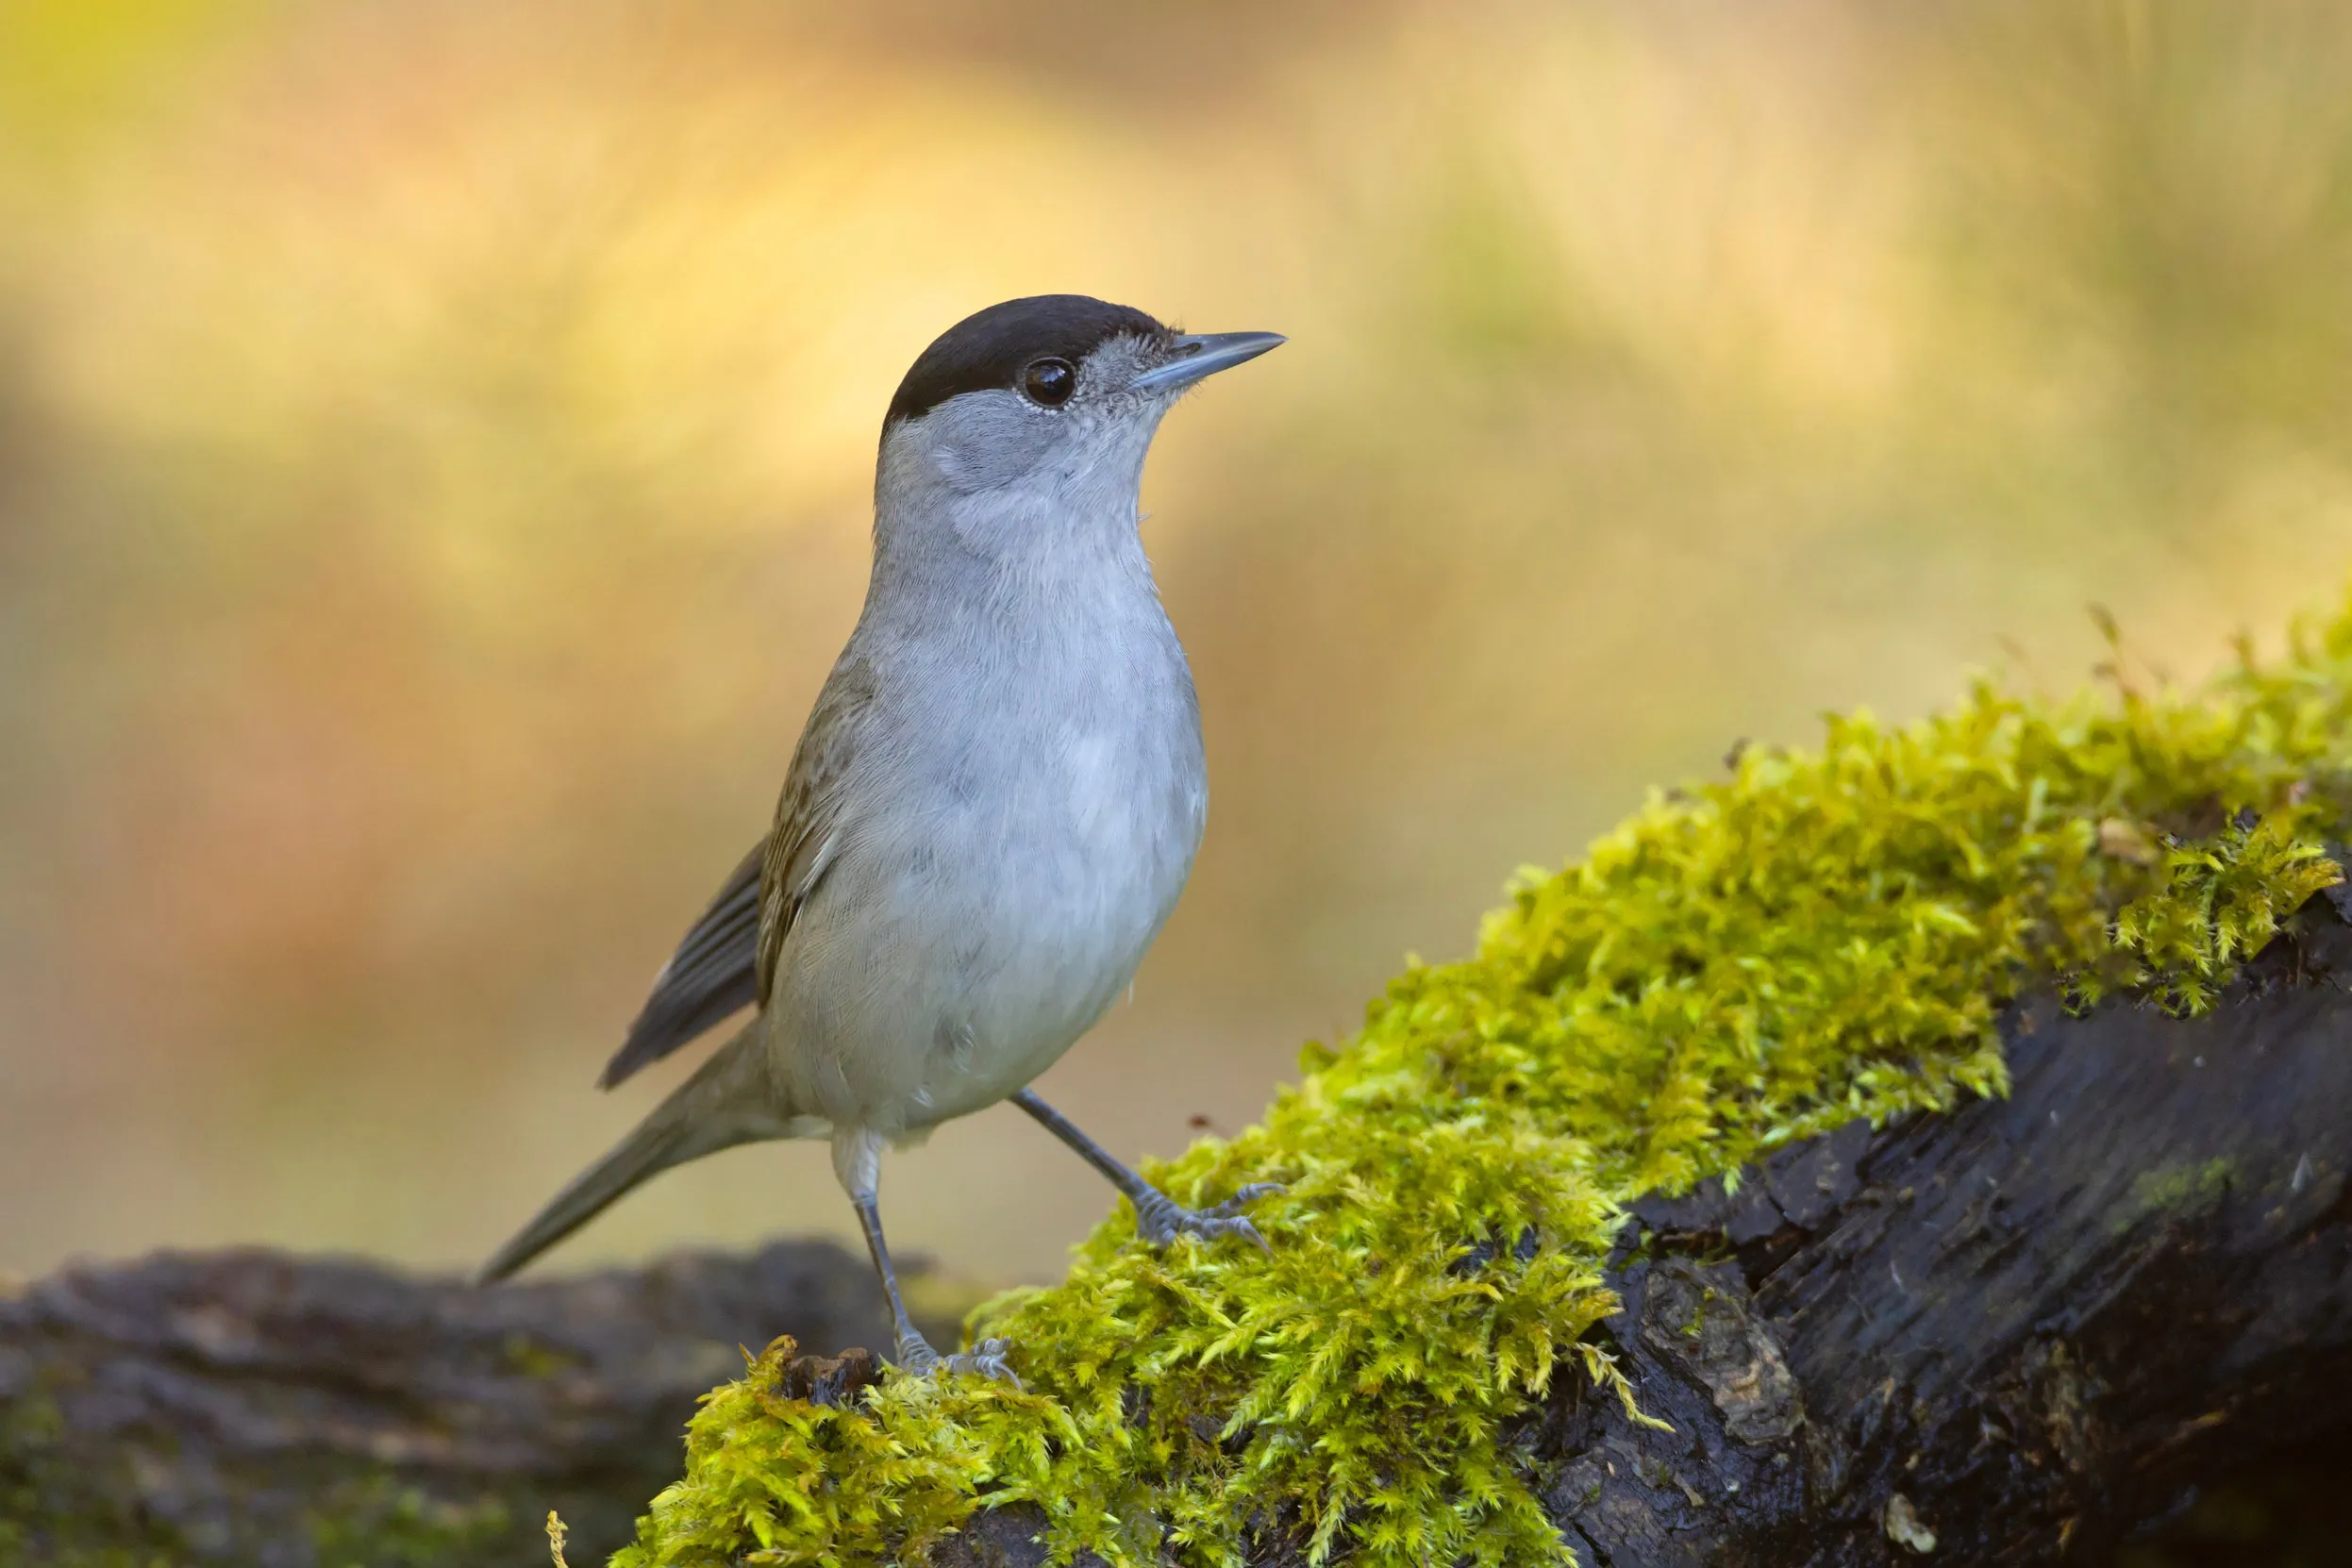 A lone Blackcap perched on a mossy log.